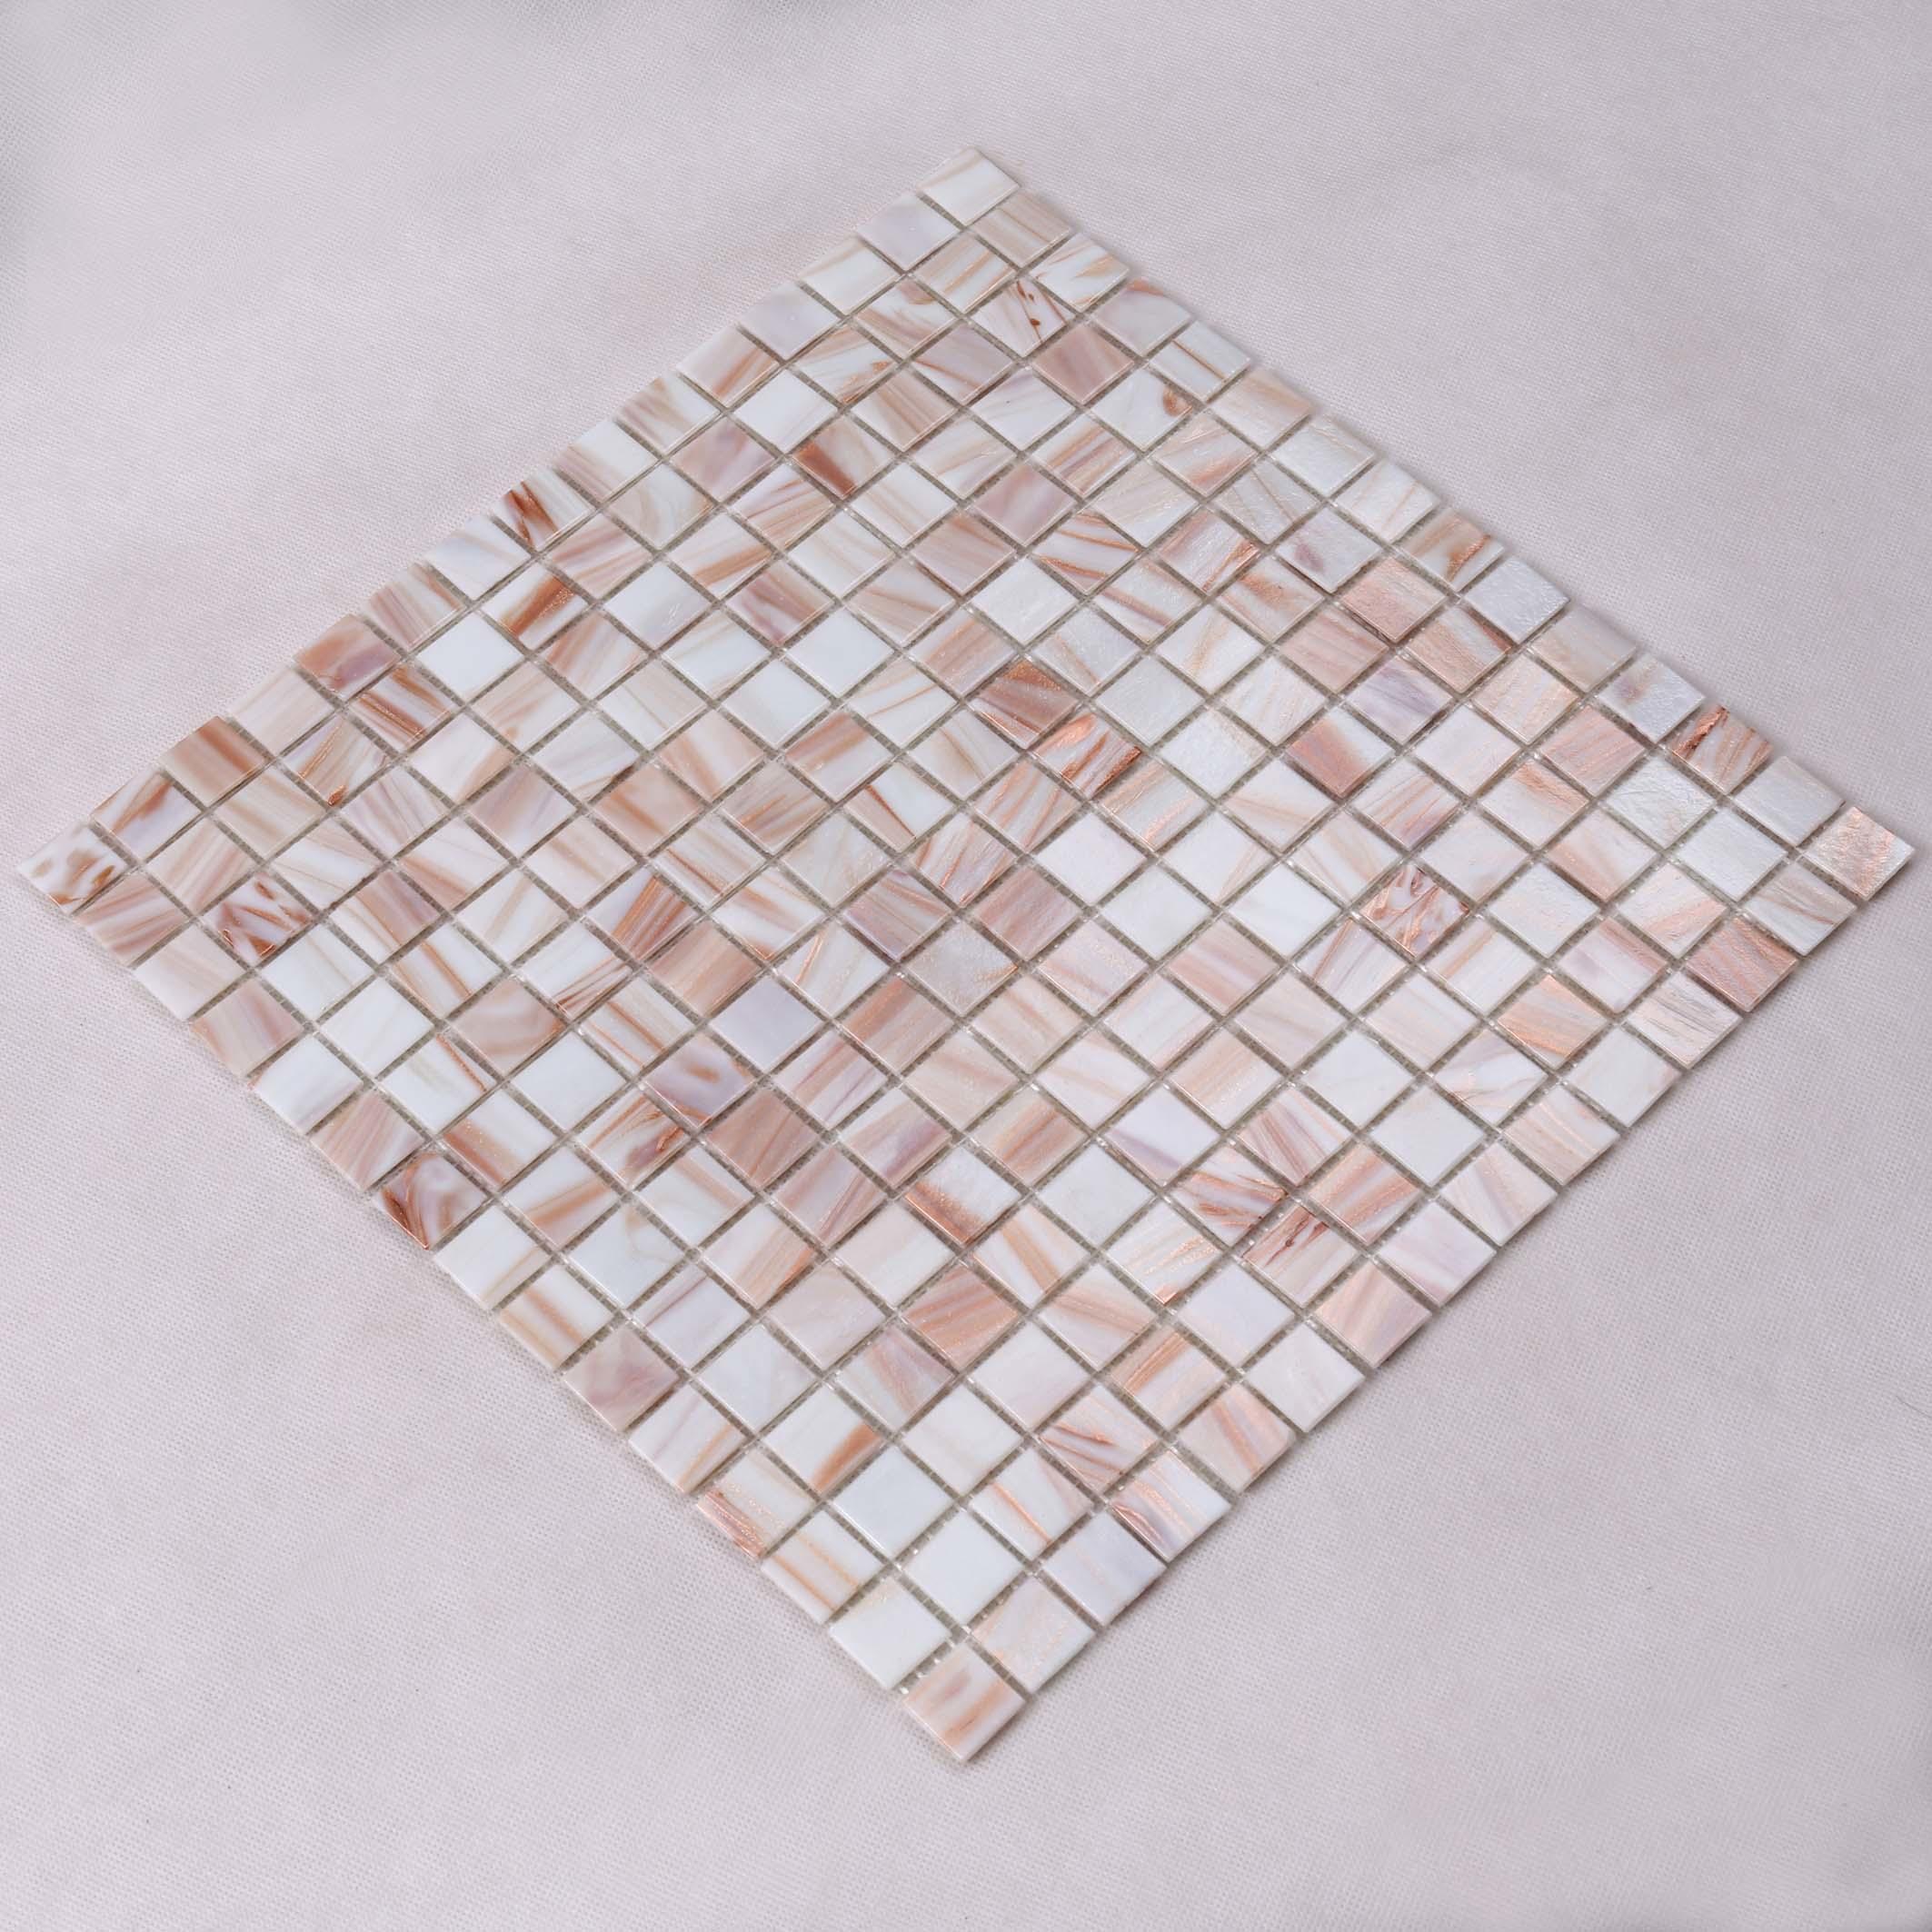 Heng Xing hand linear mosaic tile manufacturers for bathroom-3